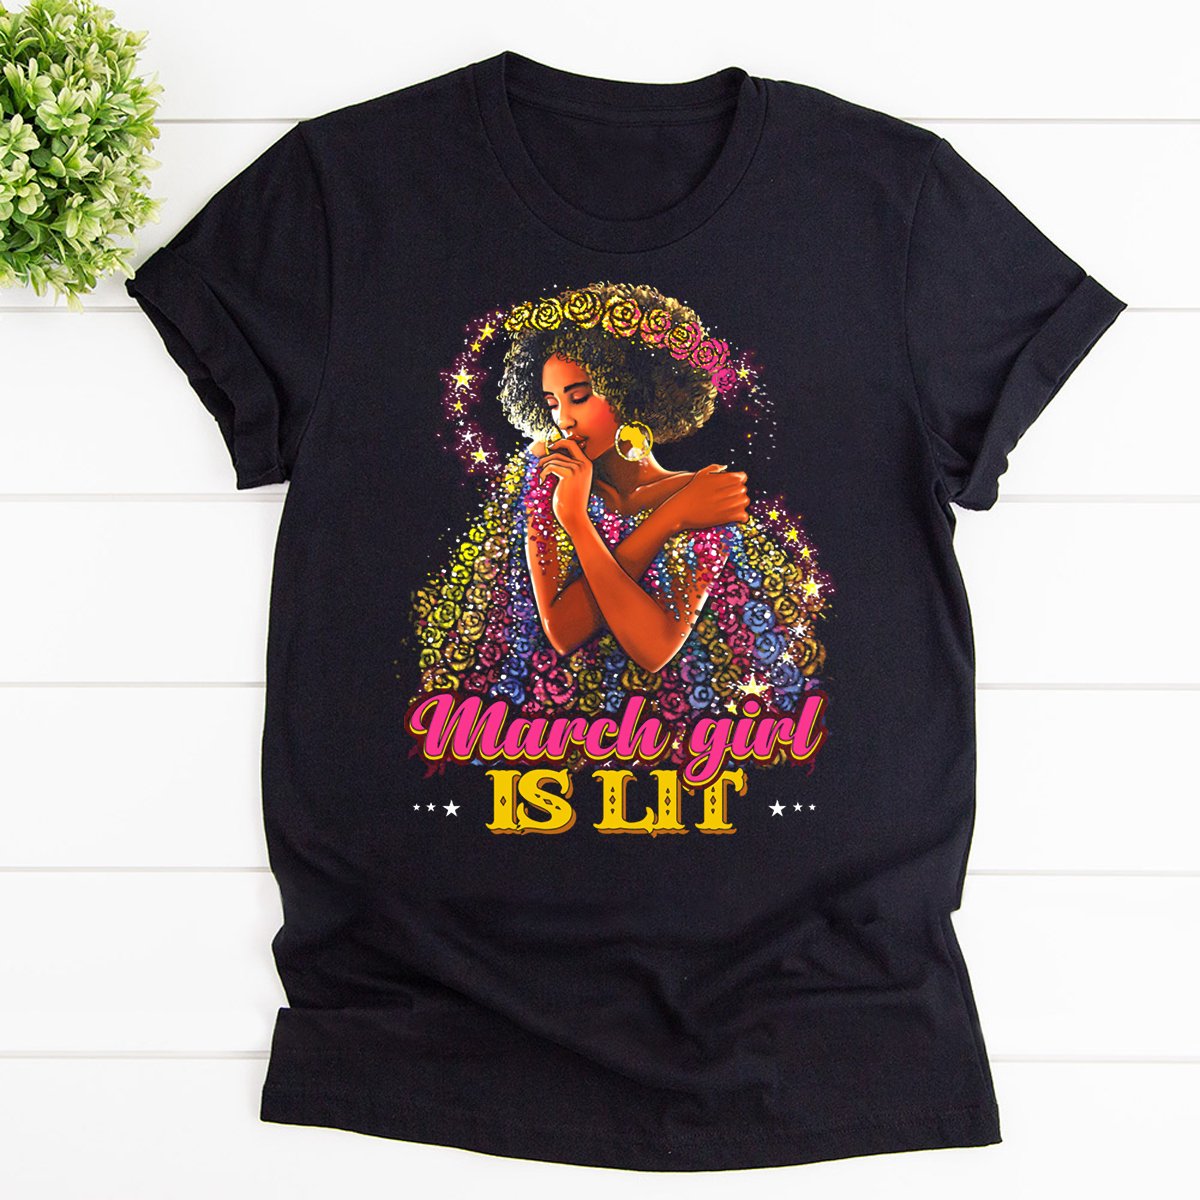 March girl is lit sparkle girl with flowers T Shirt Black Unisex S-6XL